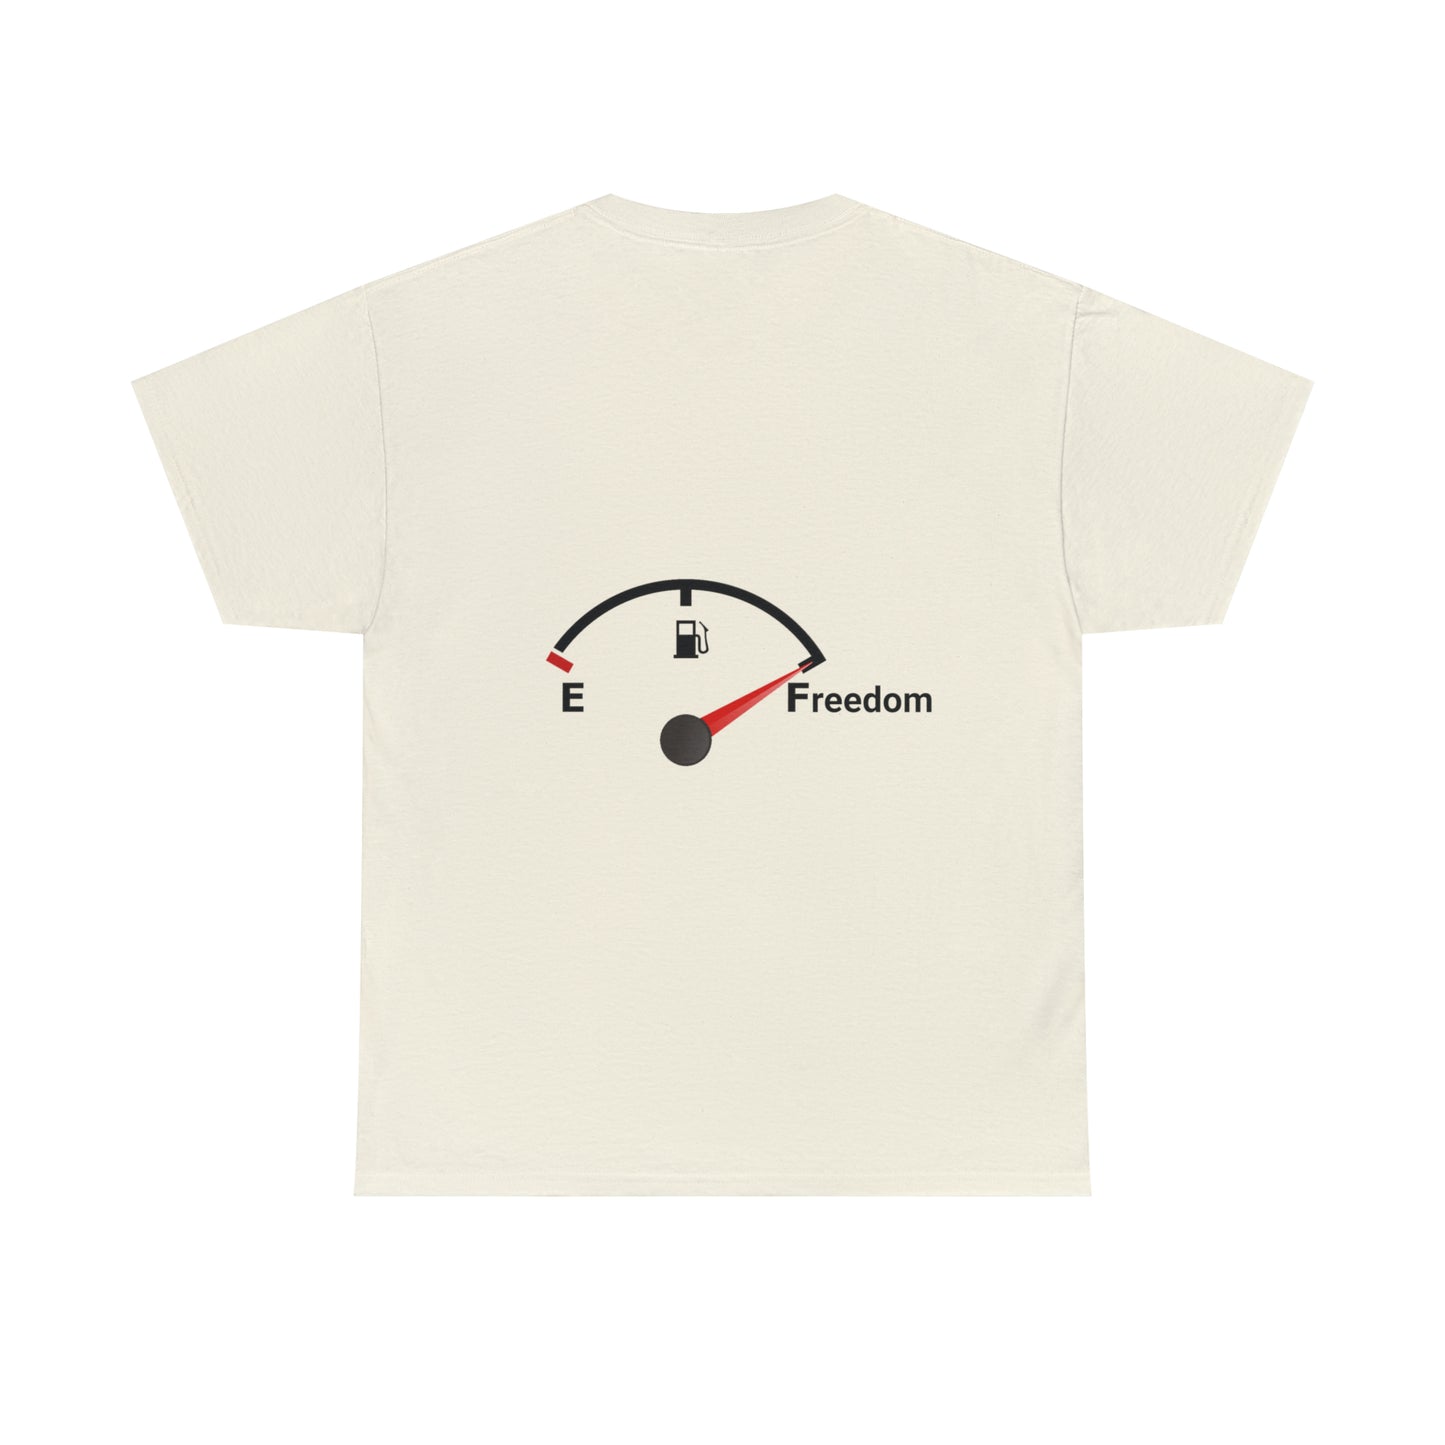 Freedom is a tank of gas Tee